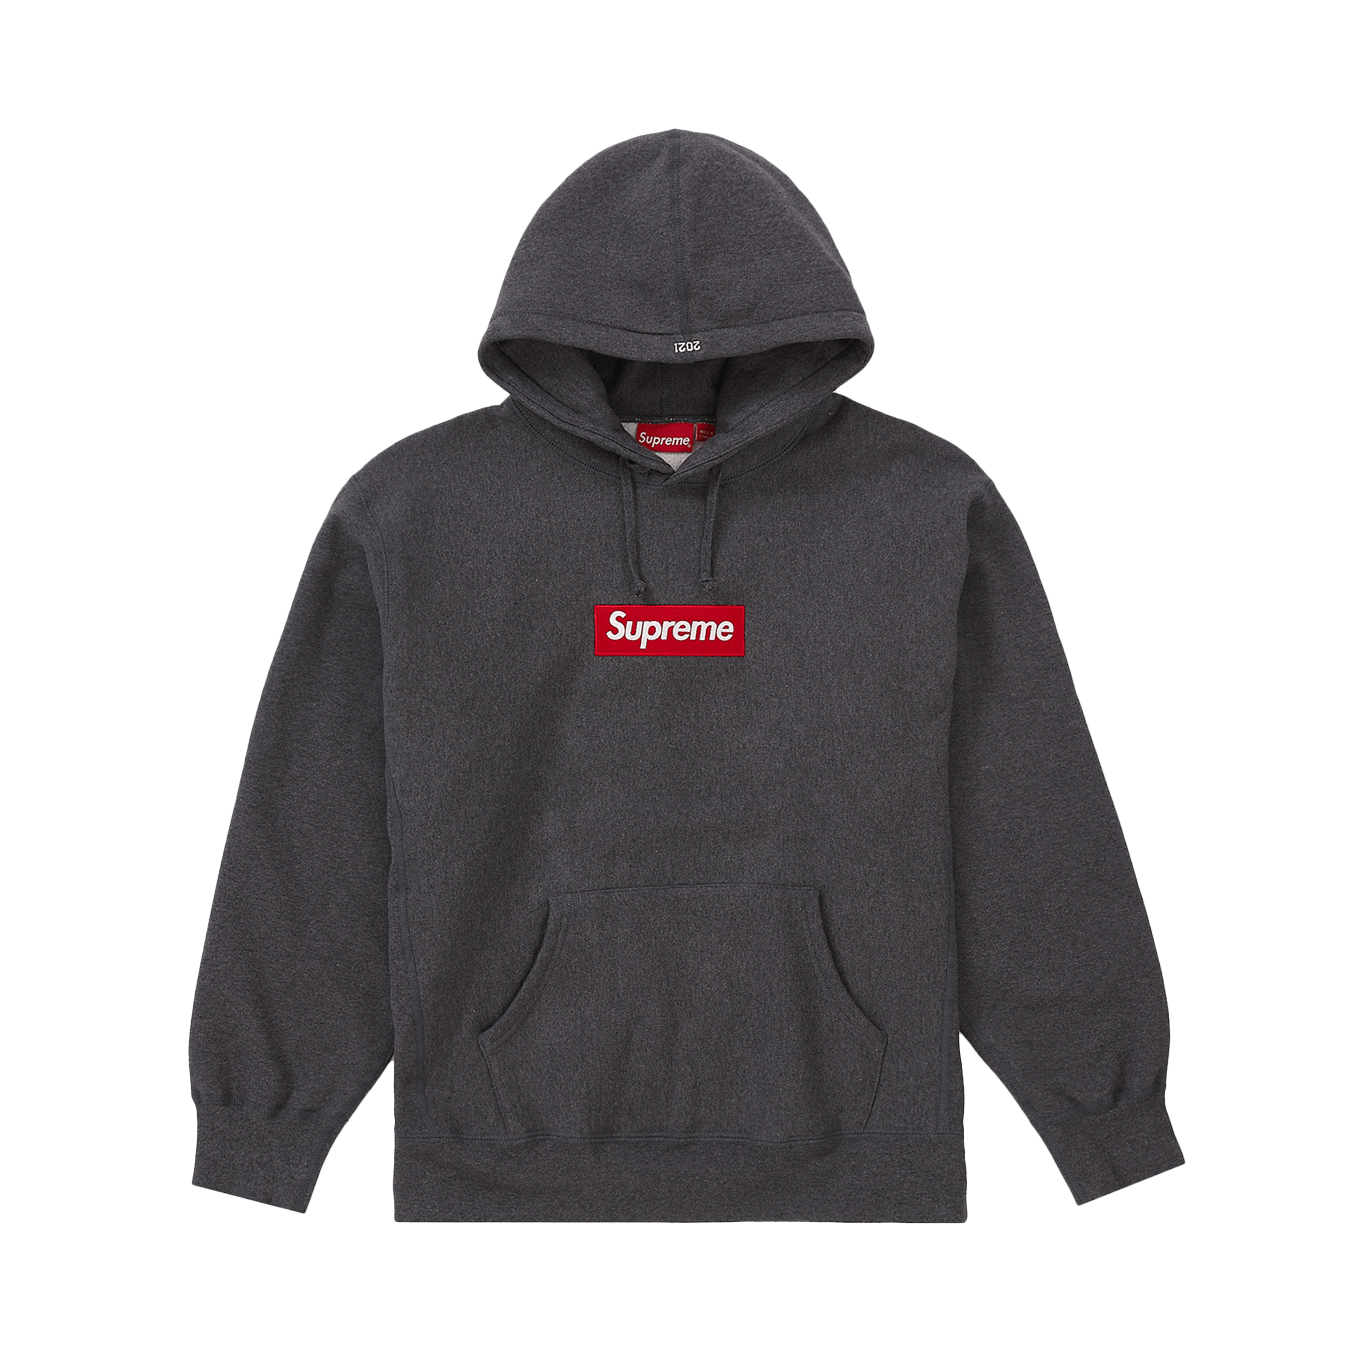 Supreme x Lady Pink Hooded Sweatshirt Multi-Color FW21 - Buy and Sell S